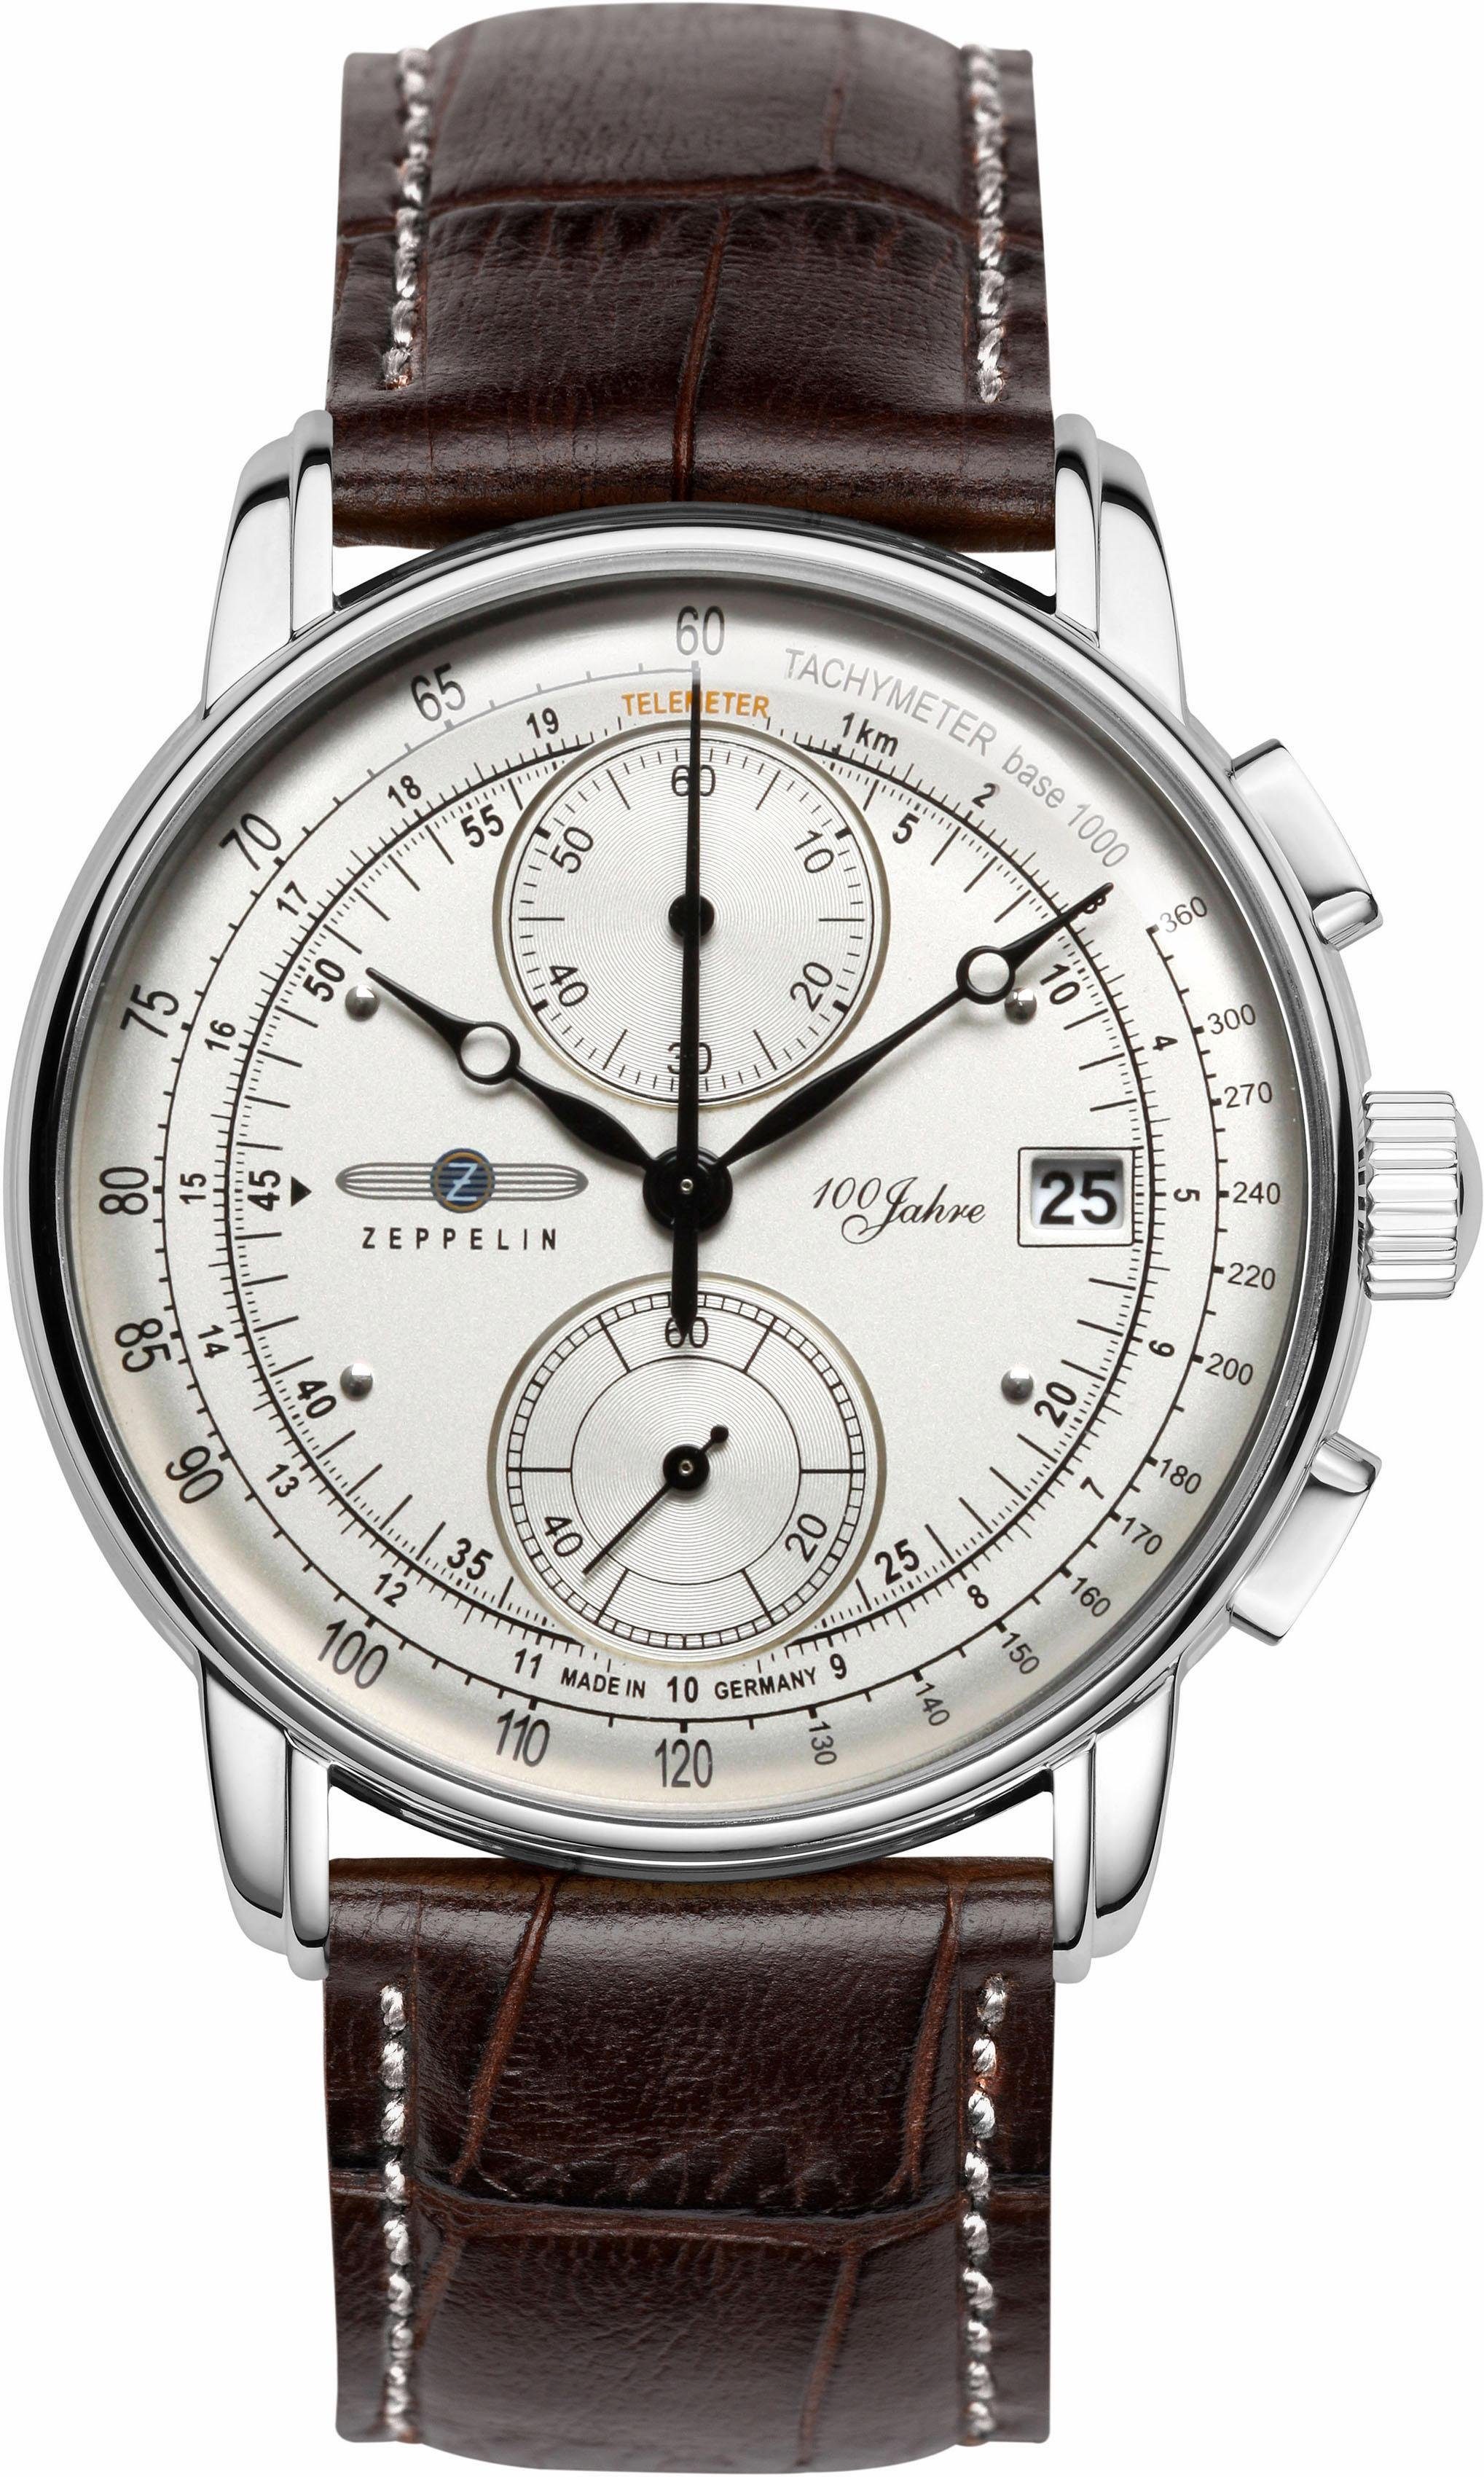 Chronograph Germany made in ZEPPELIN 86701, Zeppelin, Jahre 100